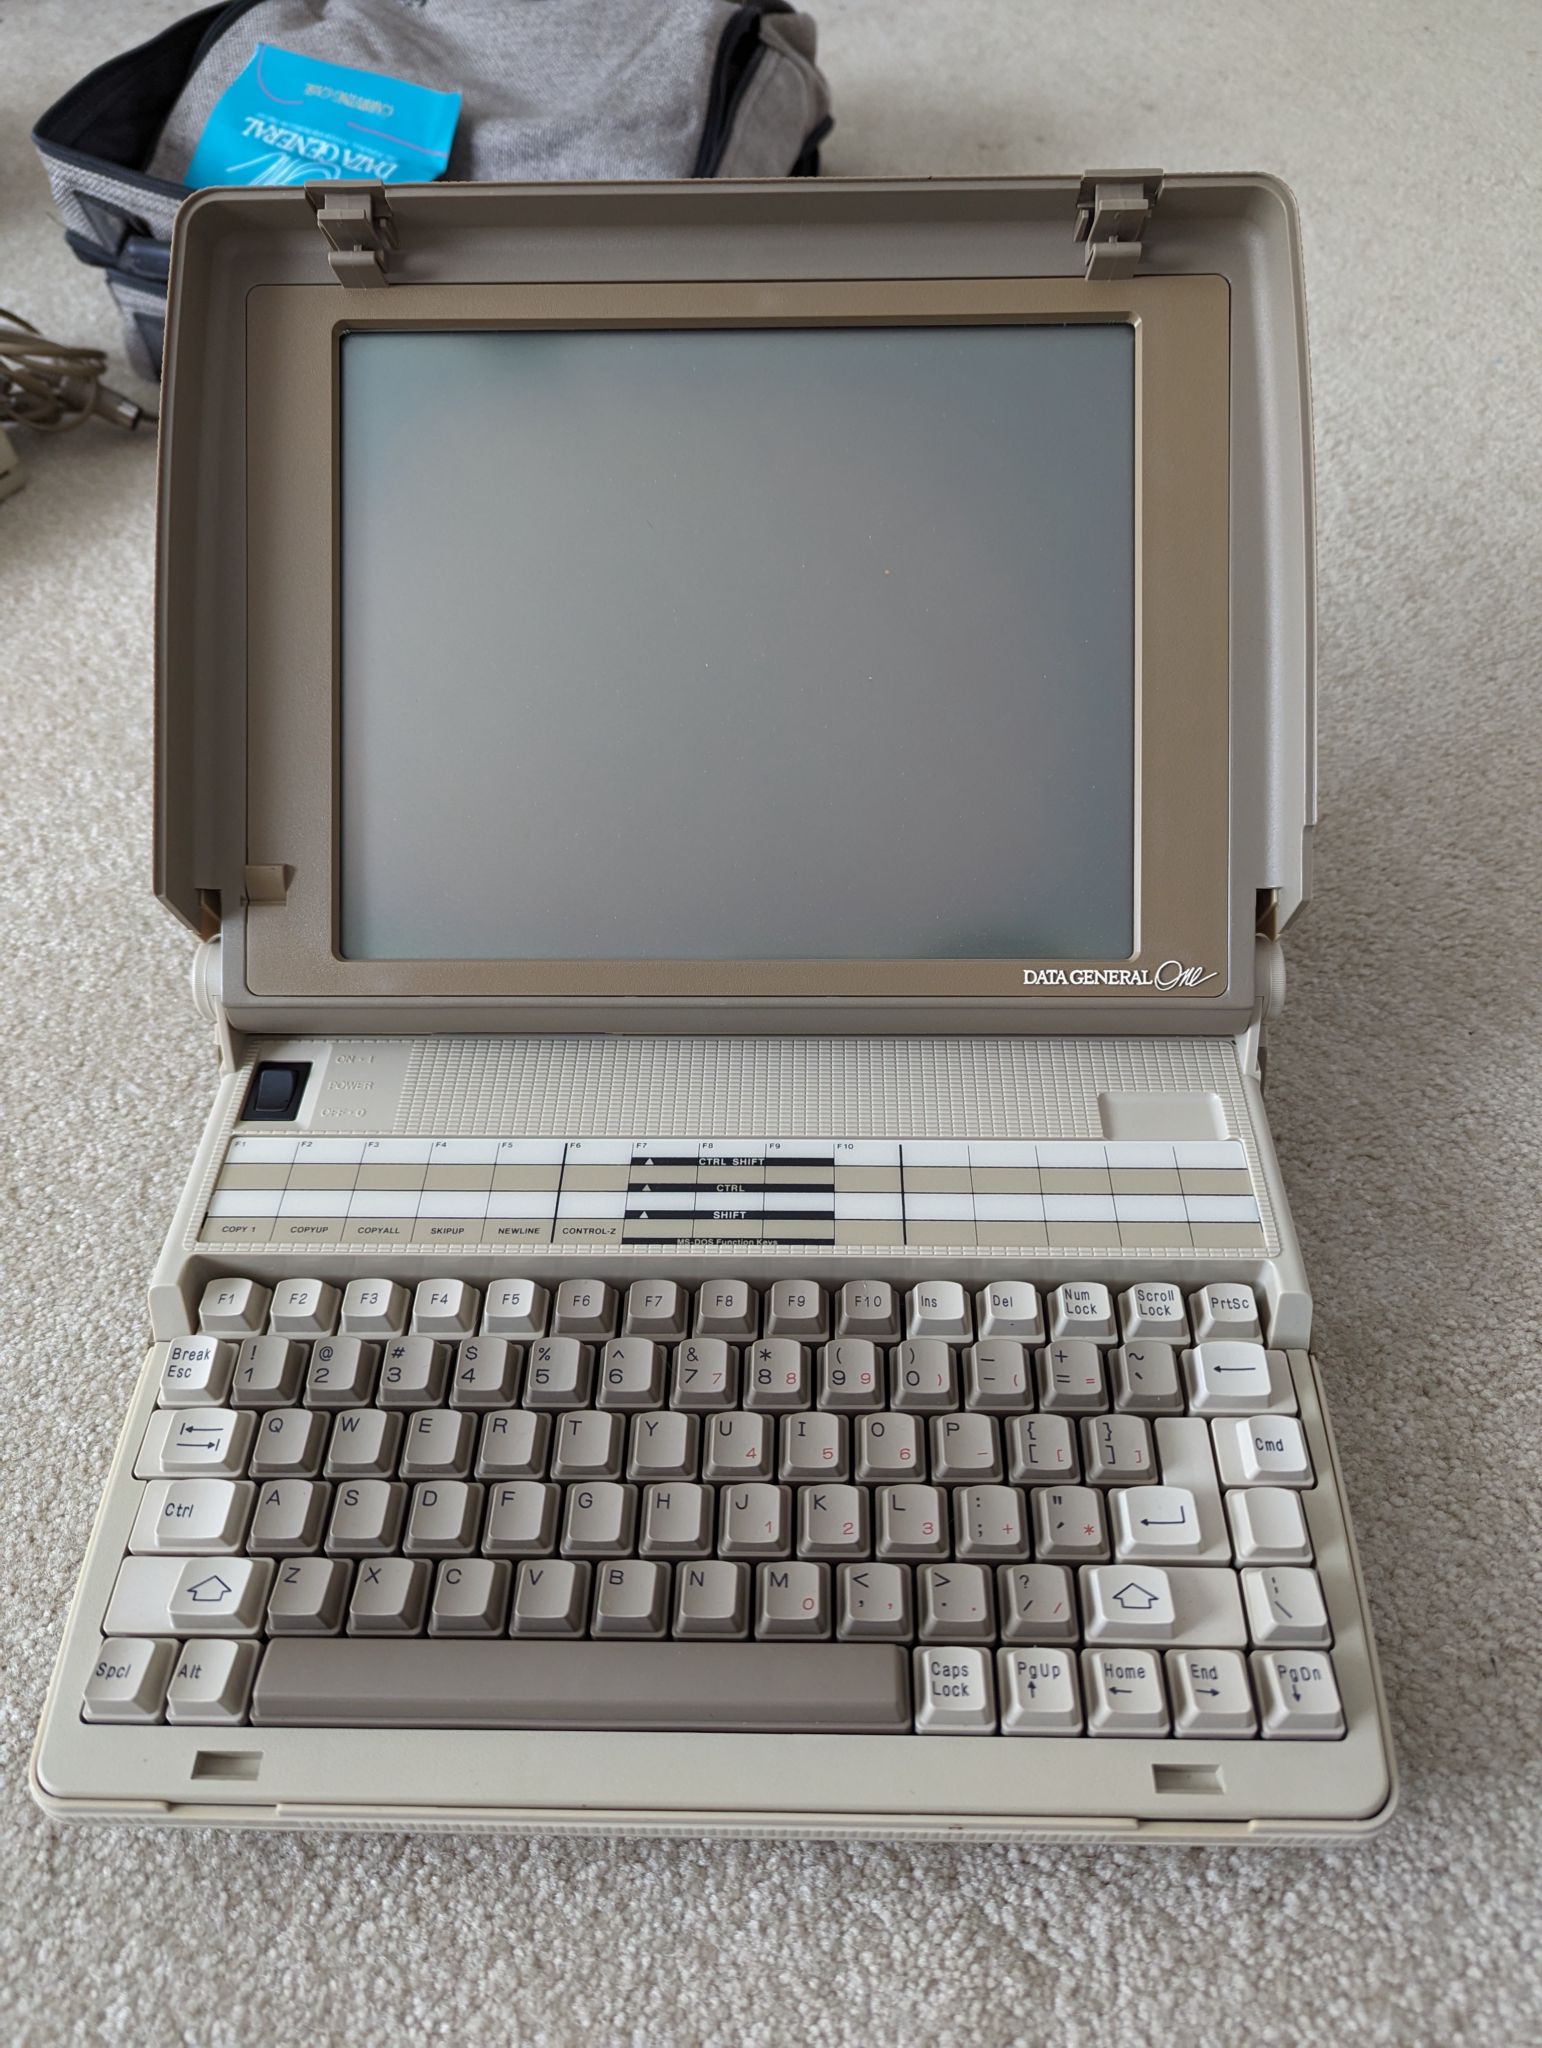 A quite old chunky laptop